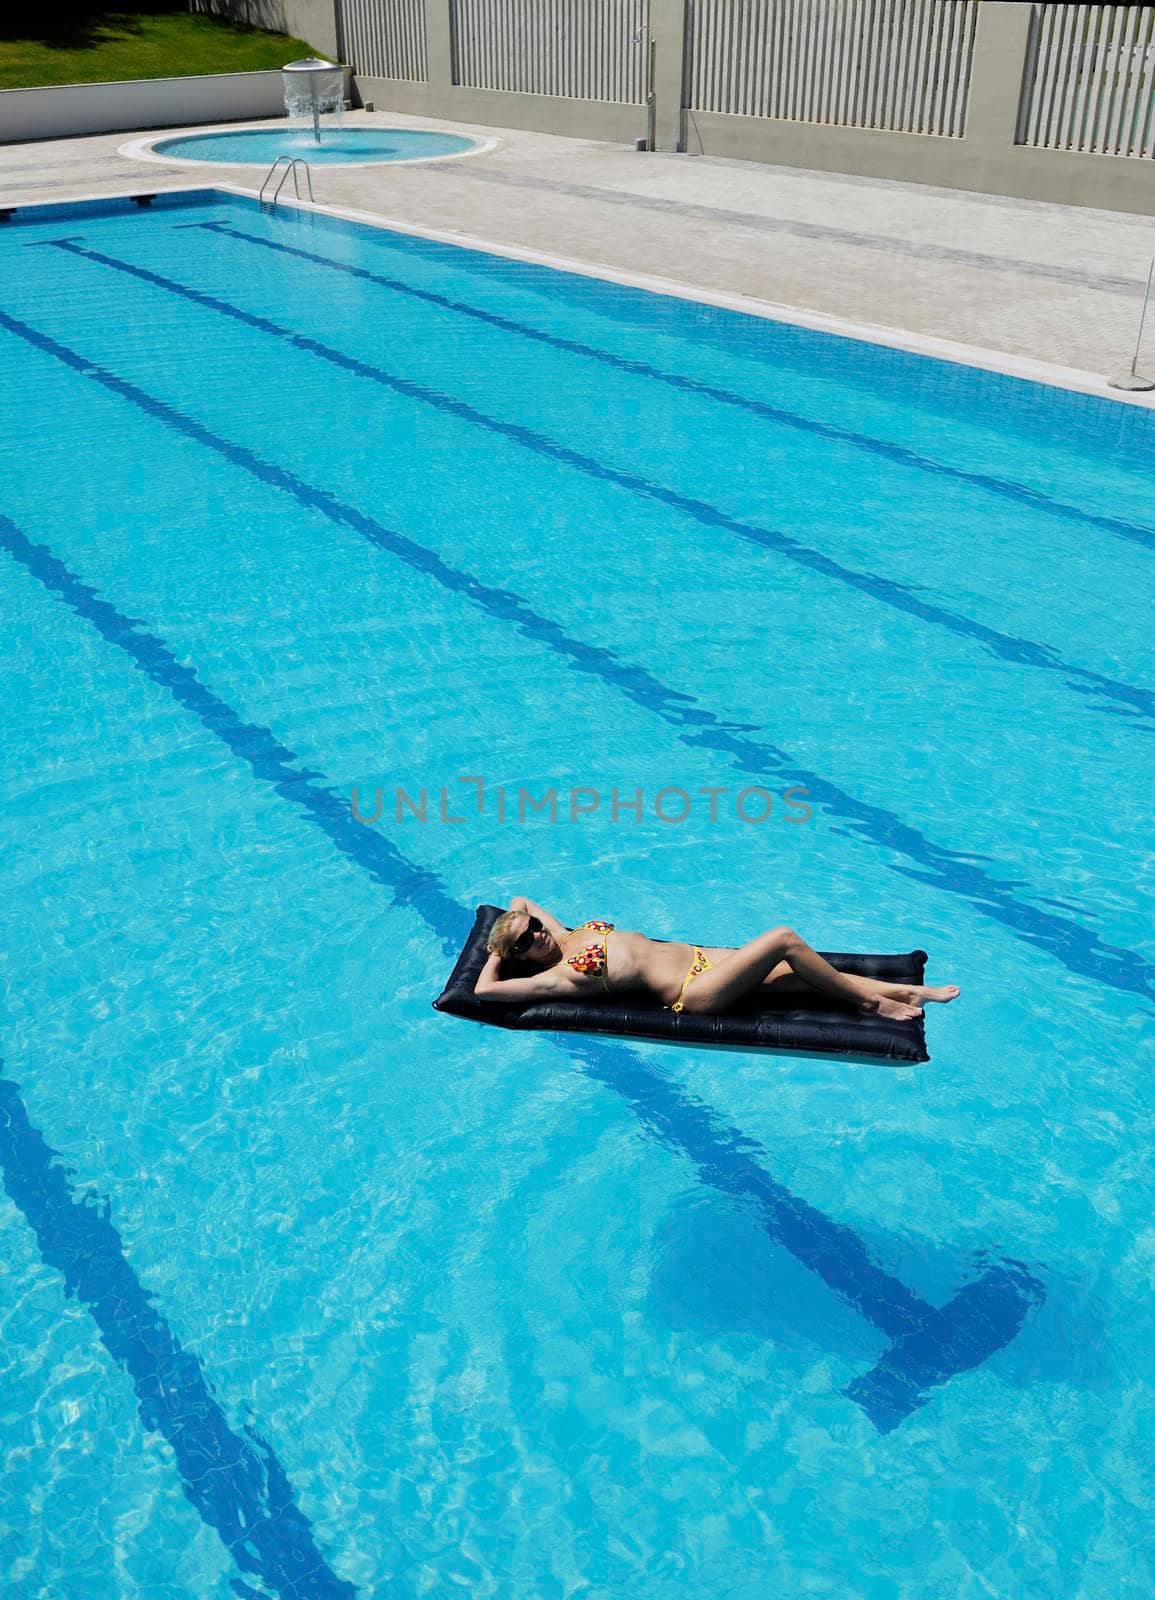 beautiful young woman relax and have fun at swimming pool